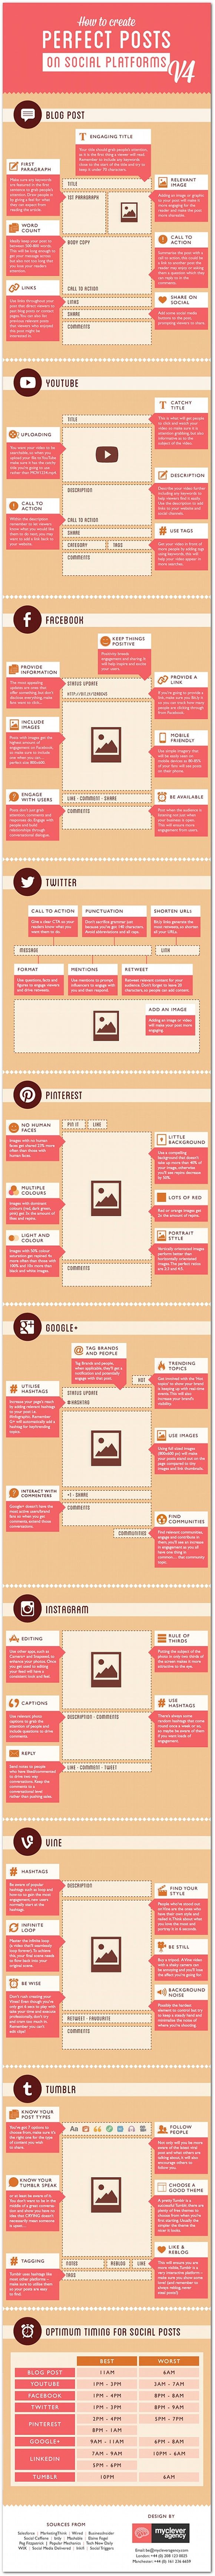 [INFOGRAPHIC] Guide to Perfect Social Media Posts...